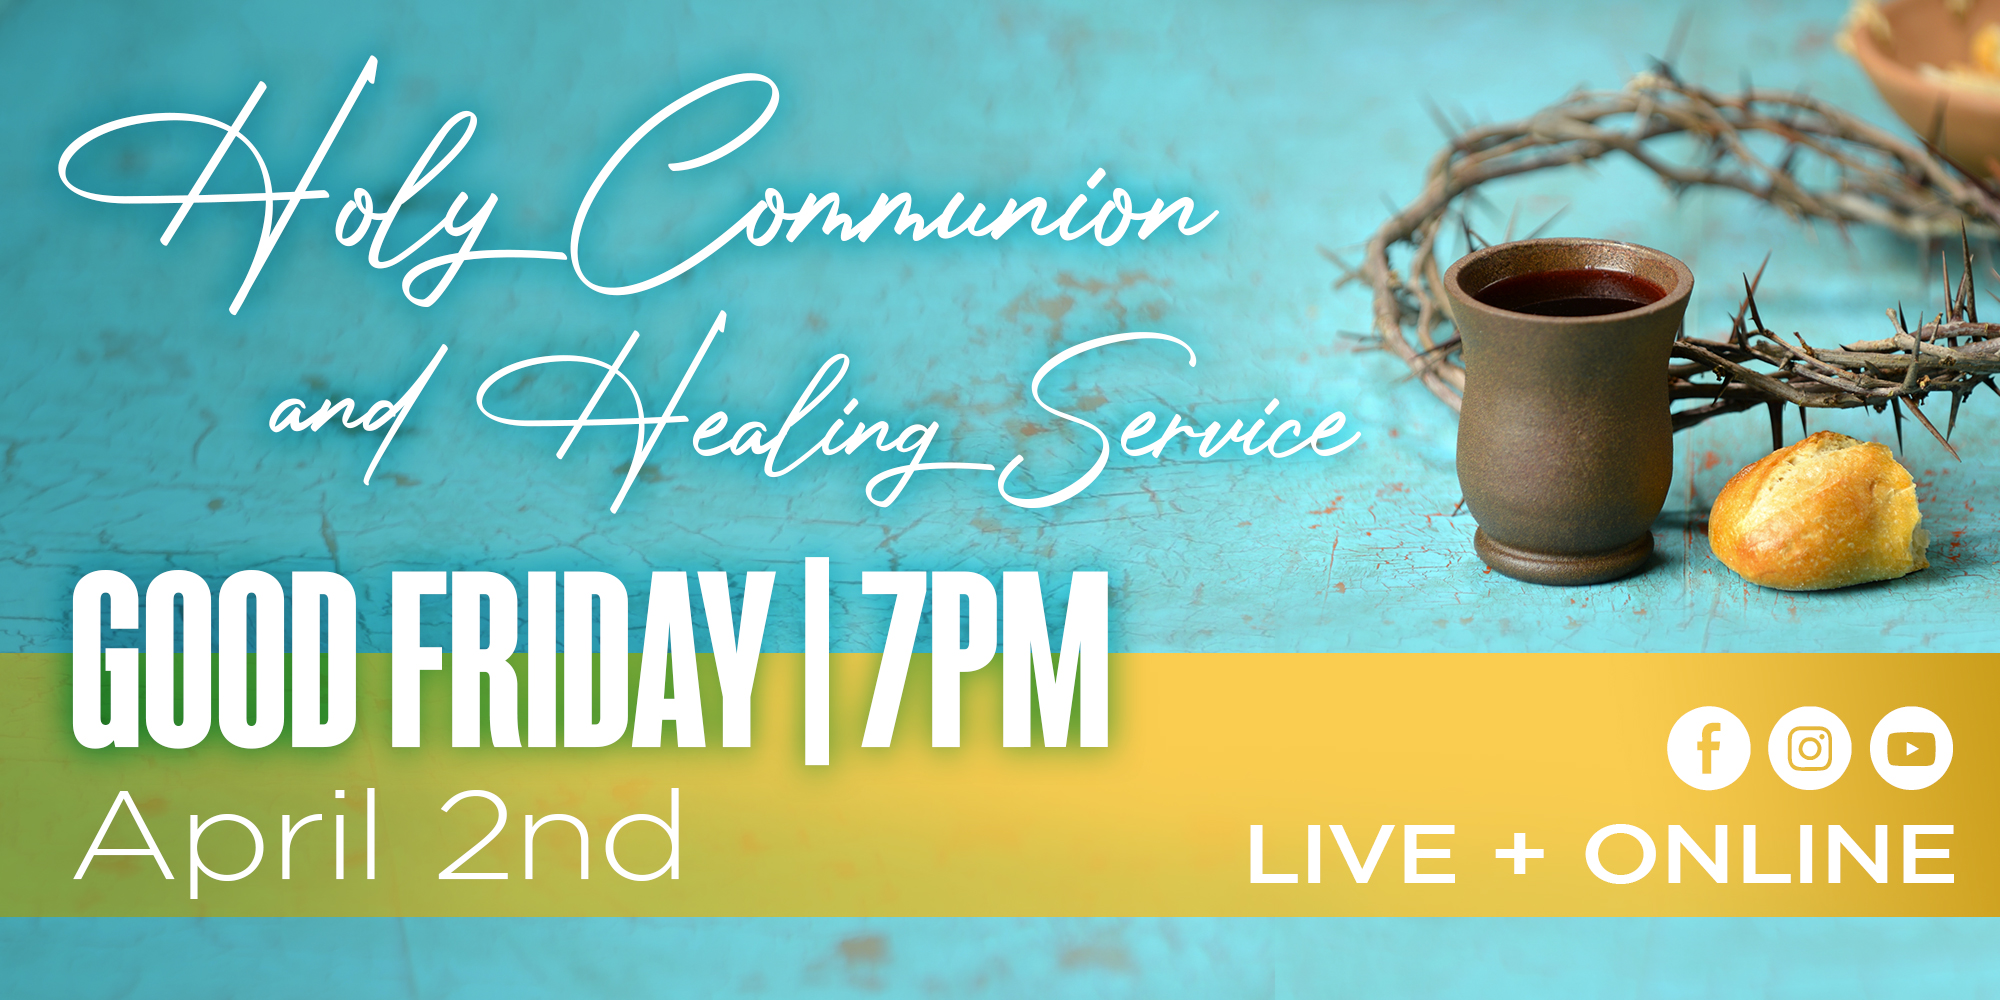 Holy Communion and Healing Service Good Friday 7PM April 2nd Live + Online Facebook Instagram Youtube